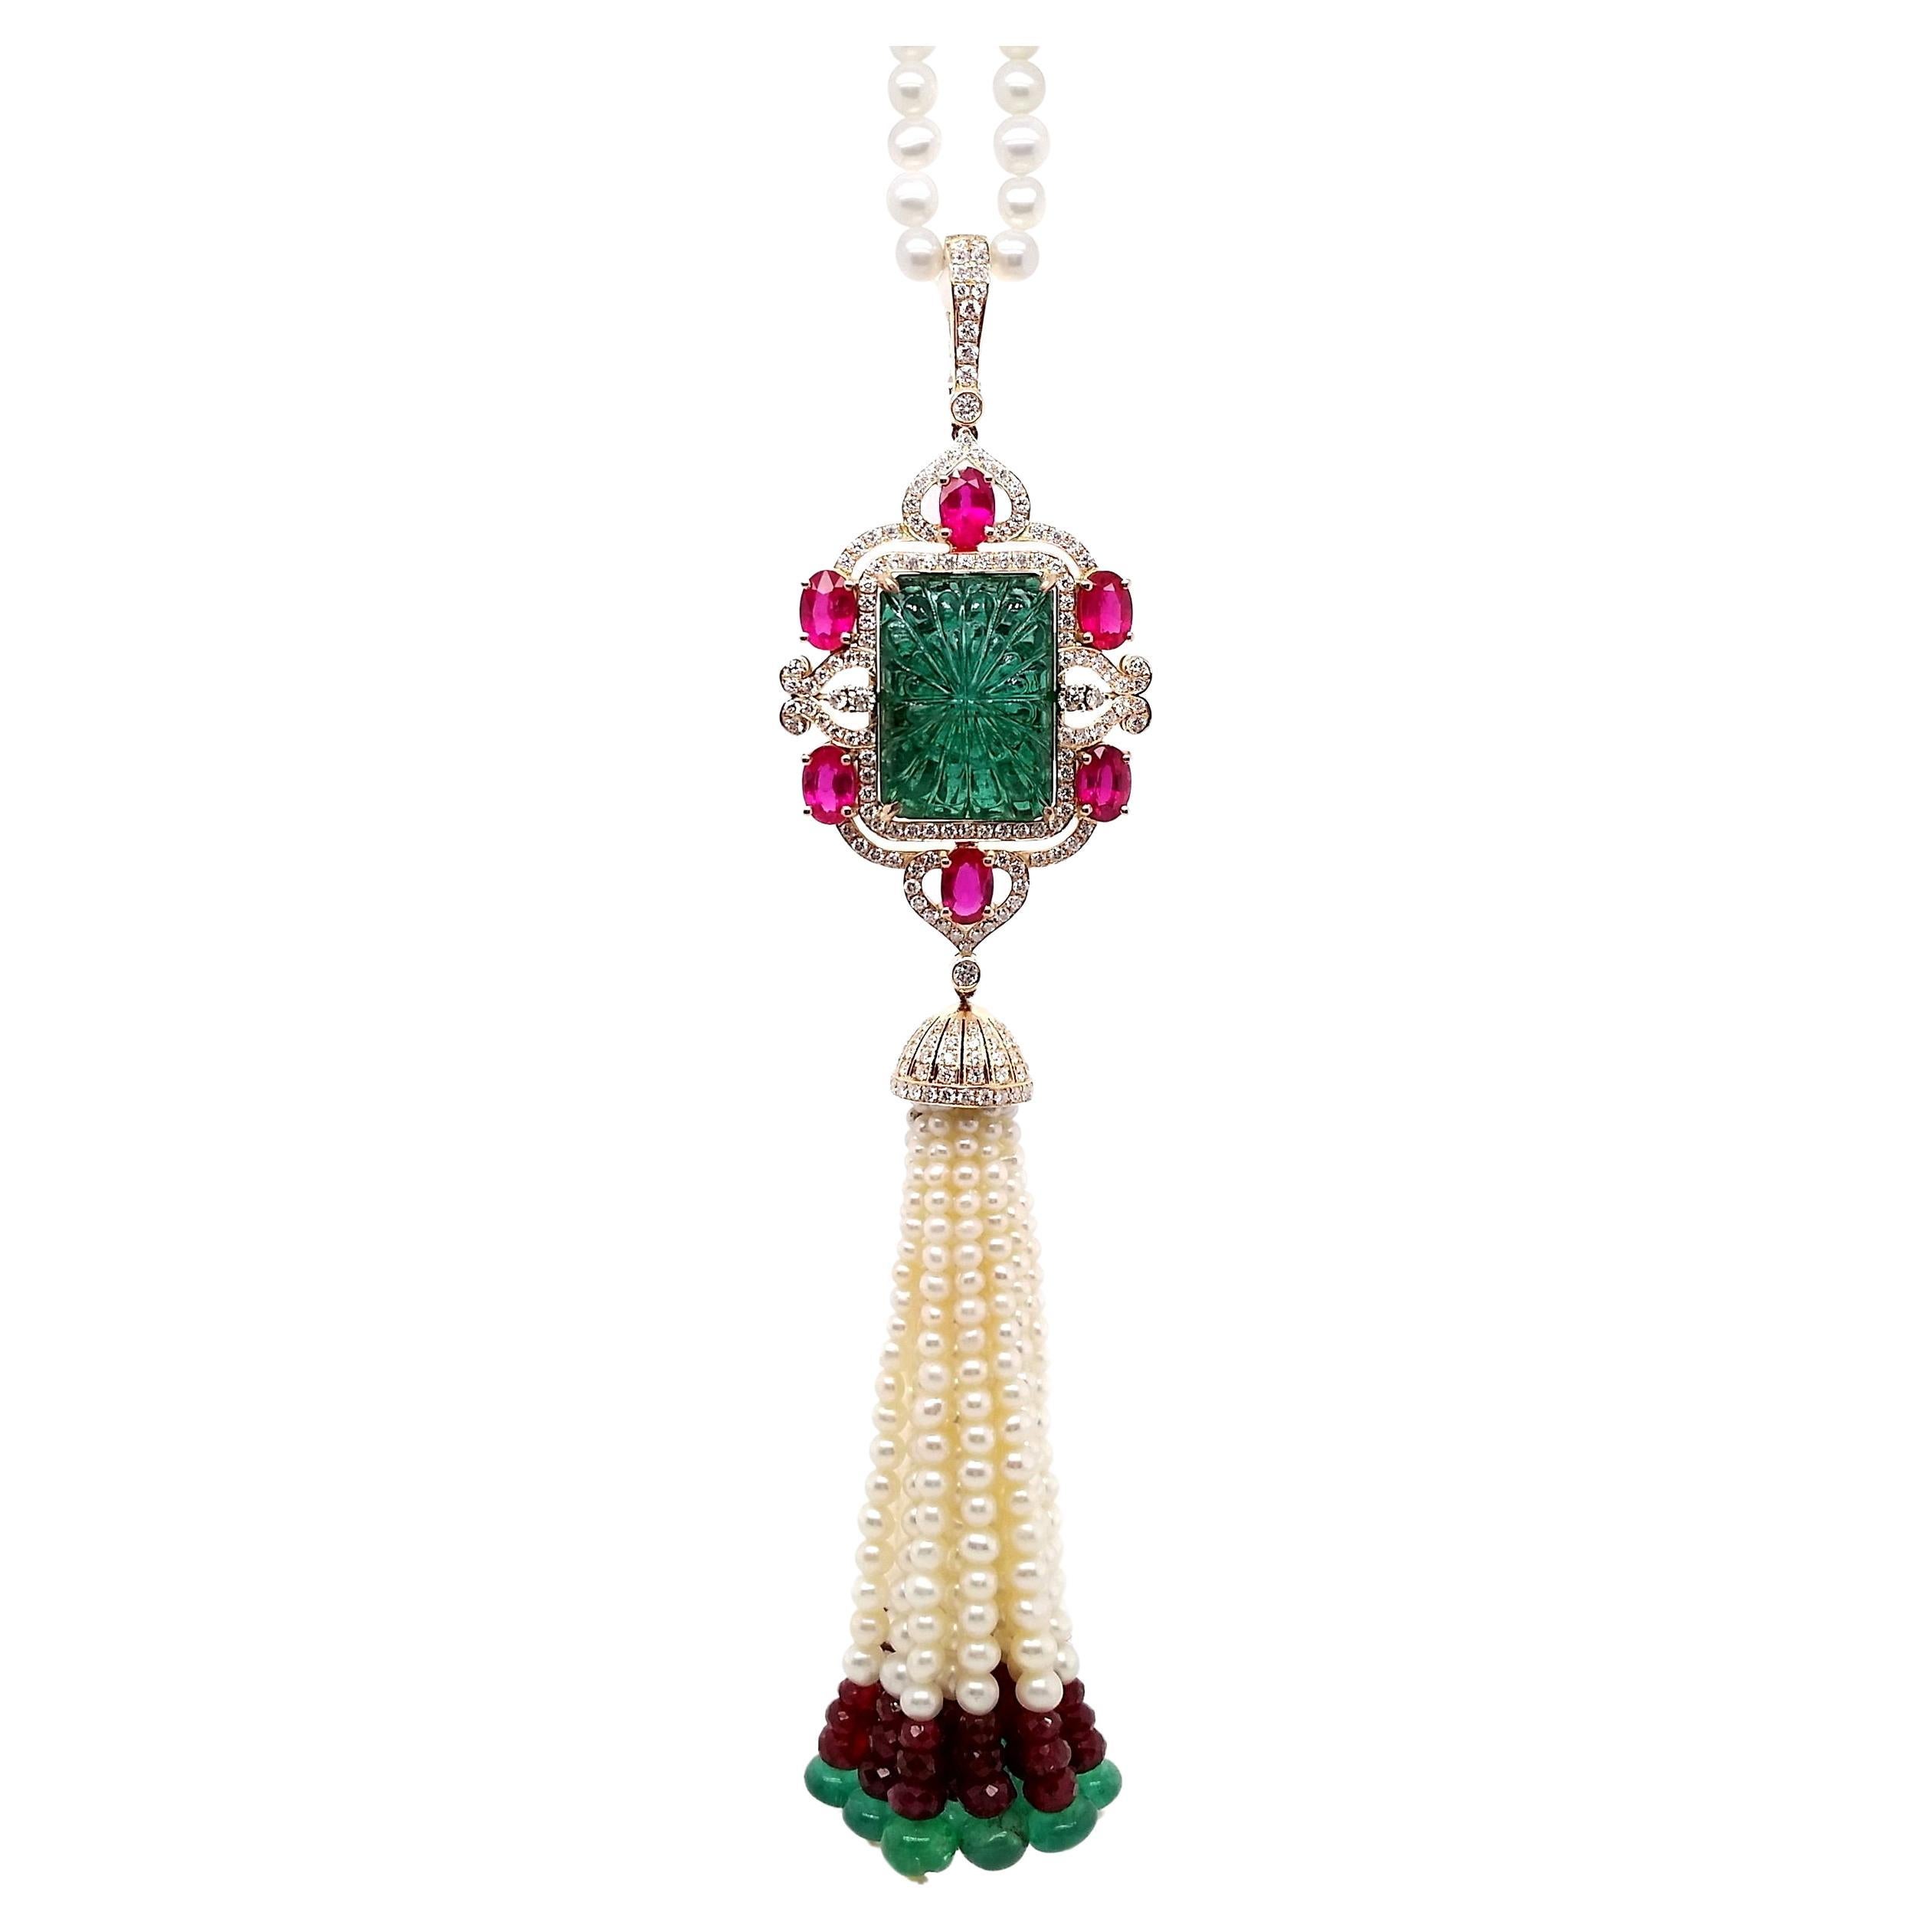 IGI Certified 30.86ct Emerald 23.65 Rubies 1.52ct Diamonds and Pearls Necklace